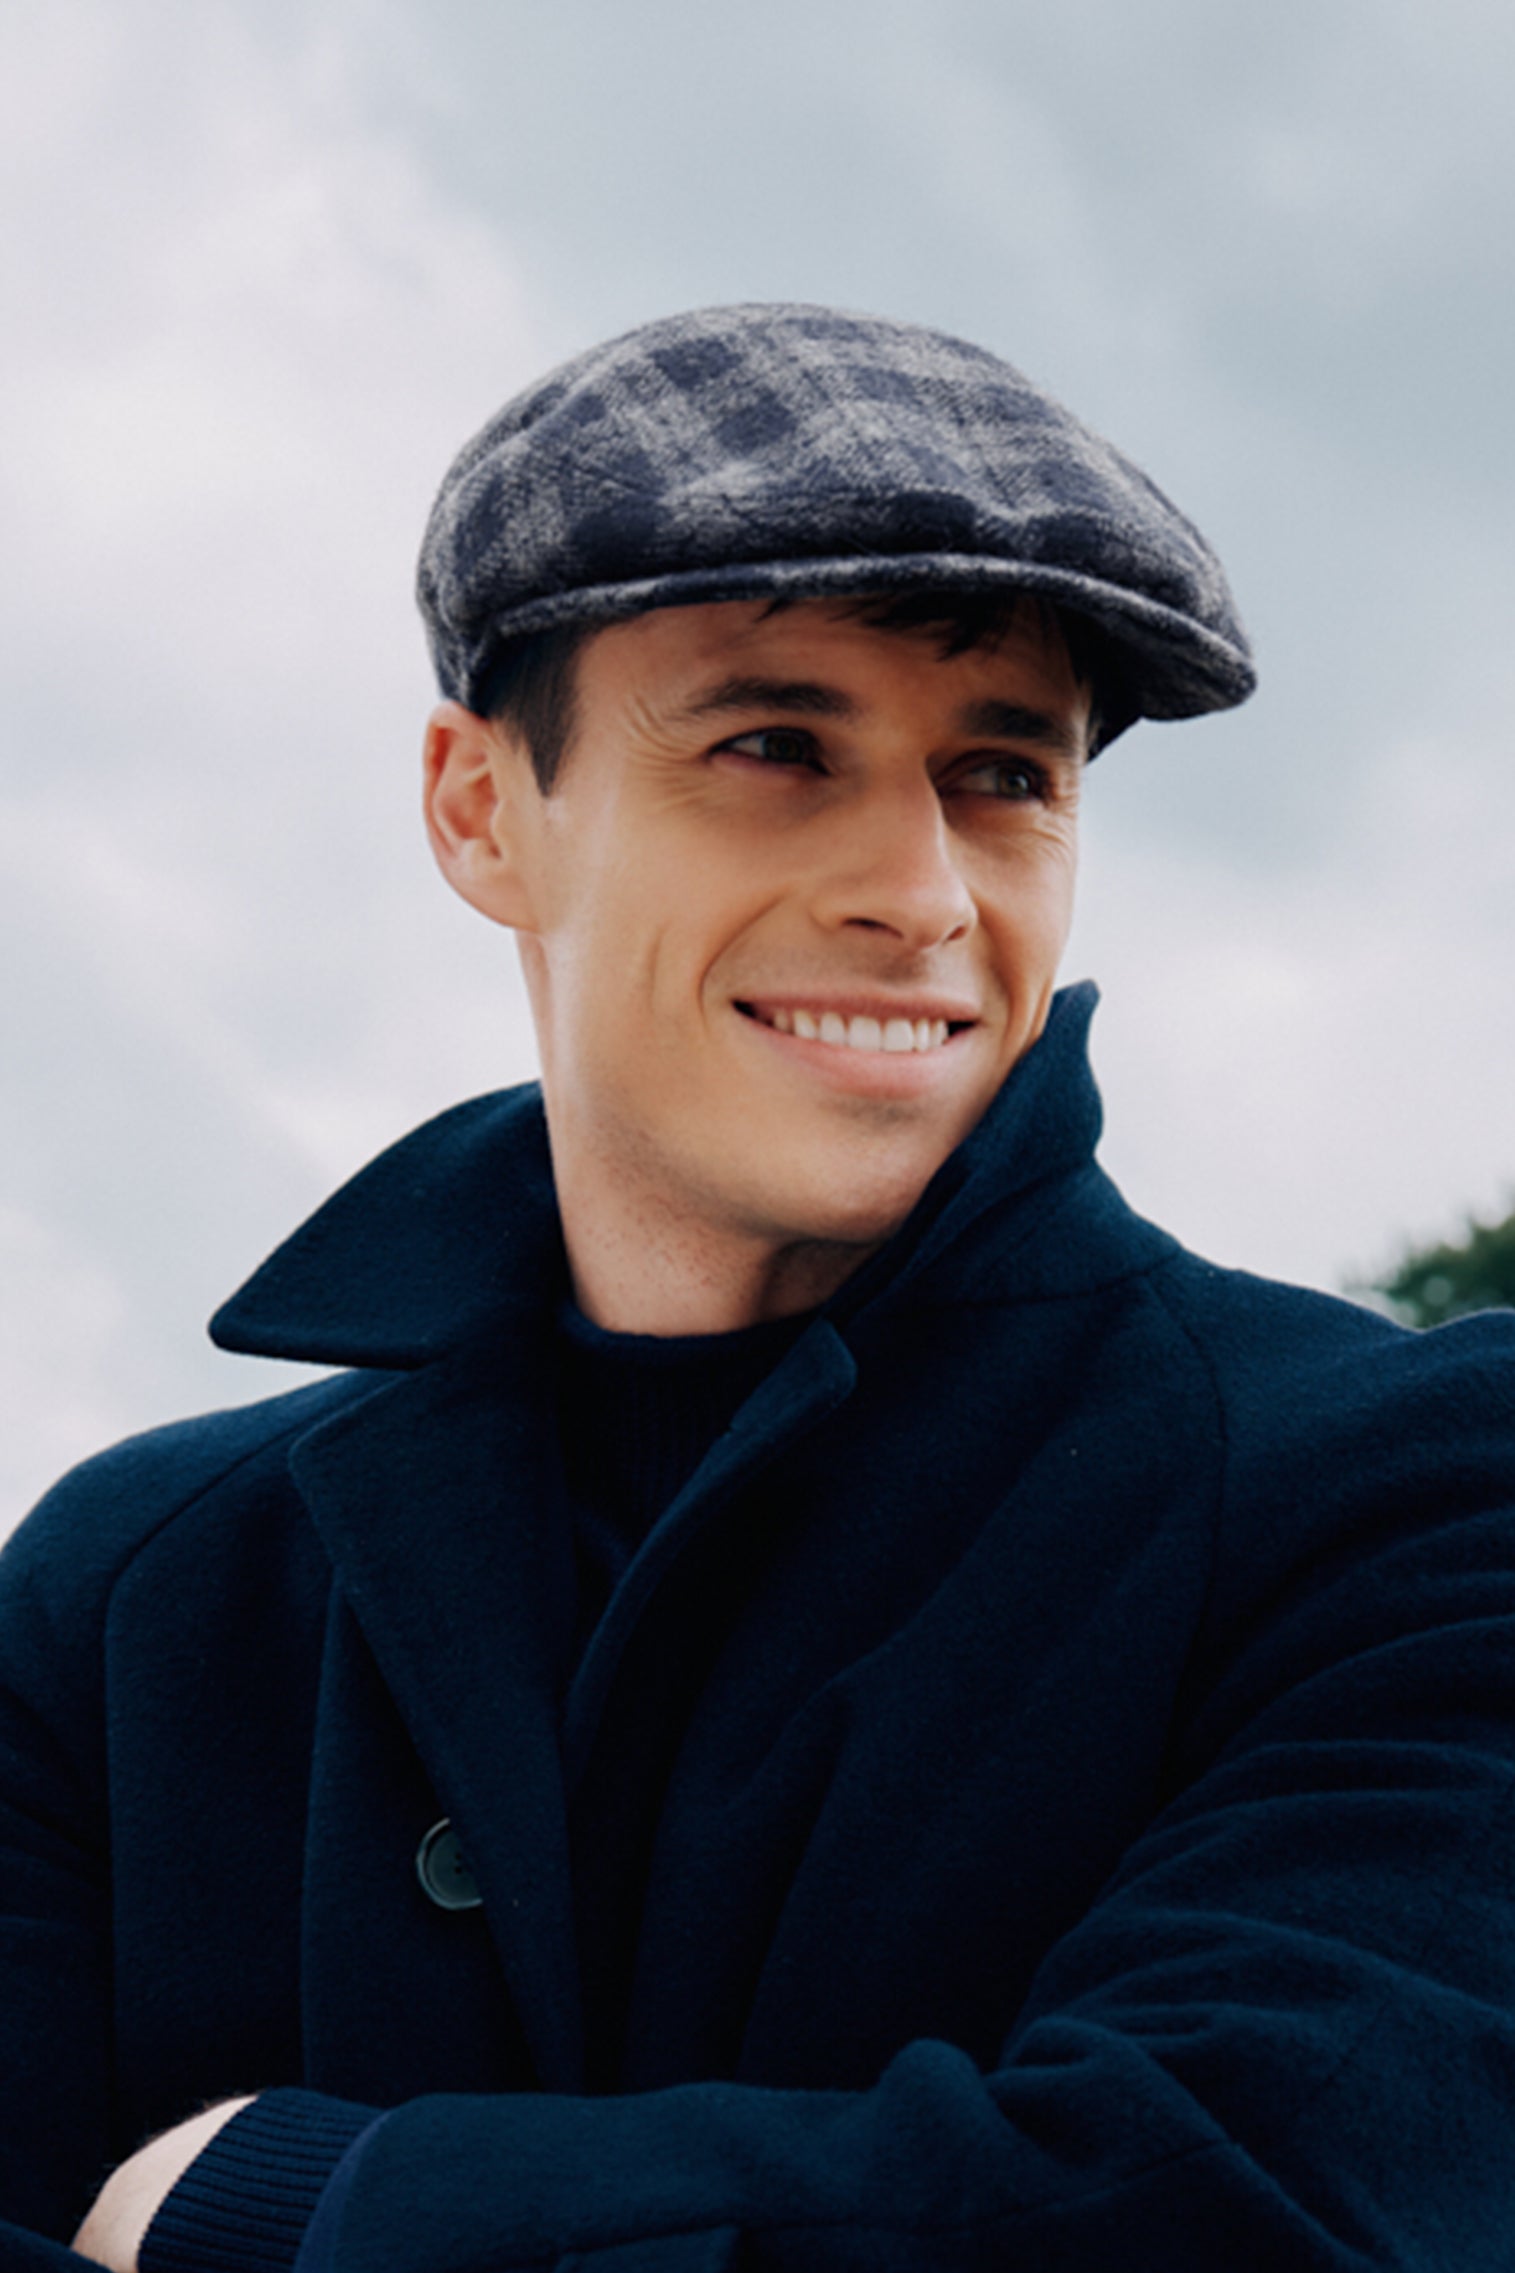 Darcy Navy Check Flat Cap - Products - Lock & Co. Hatters London UK